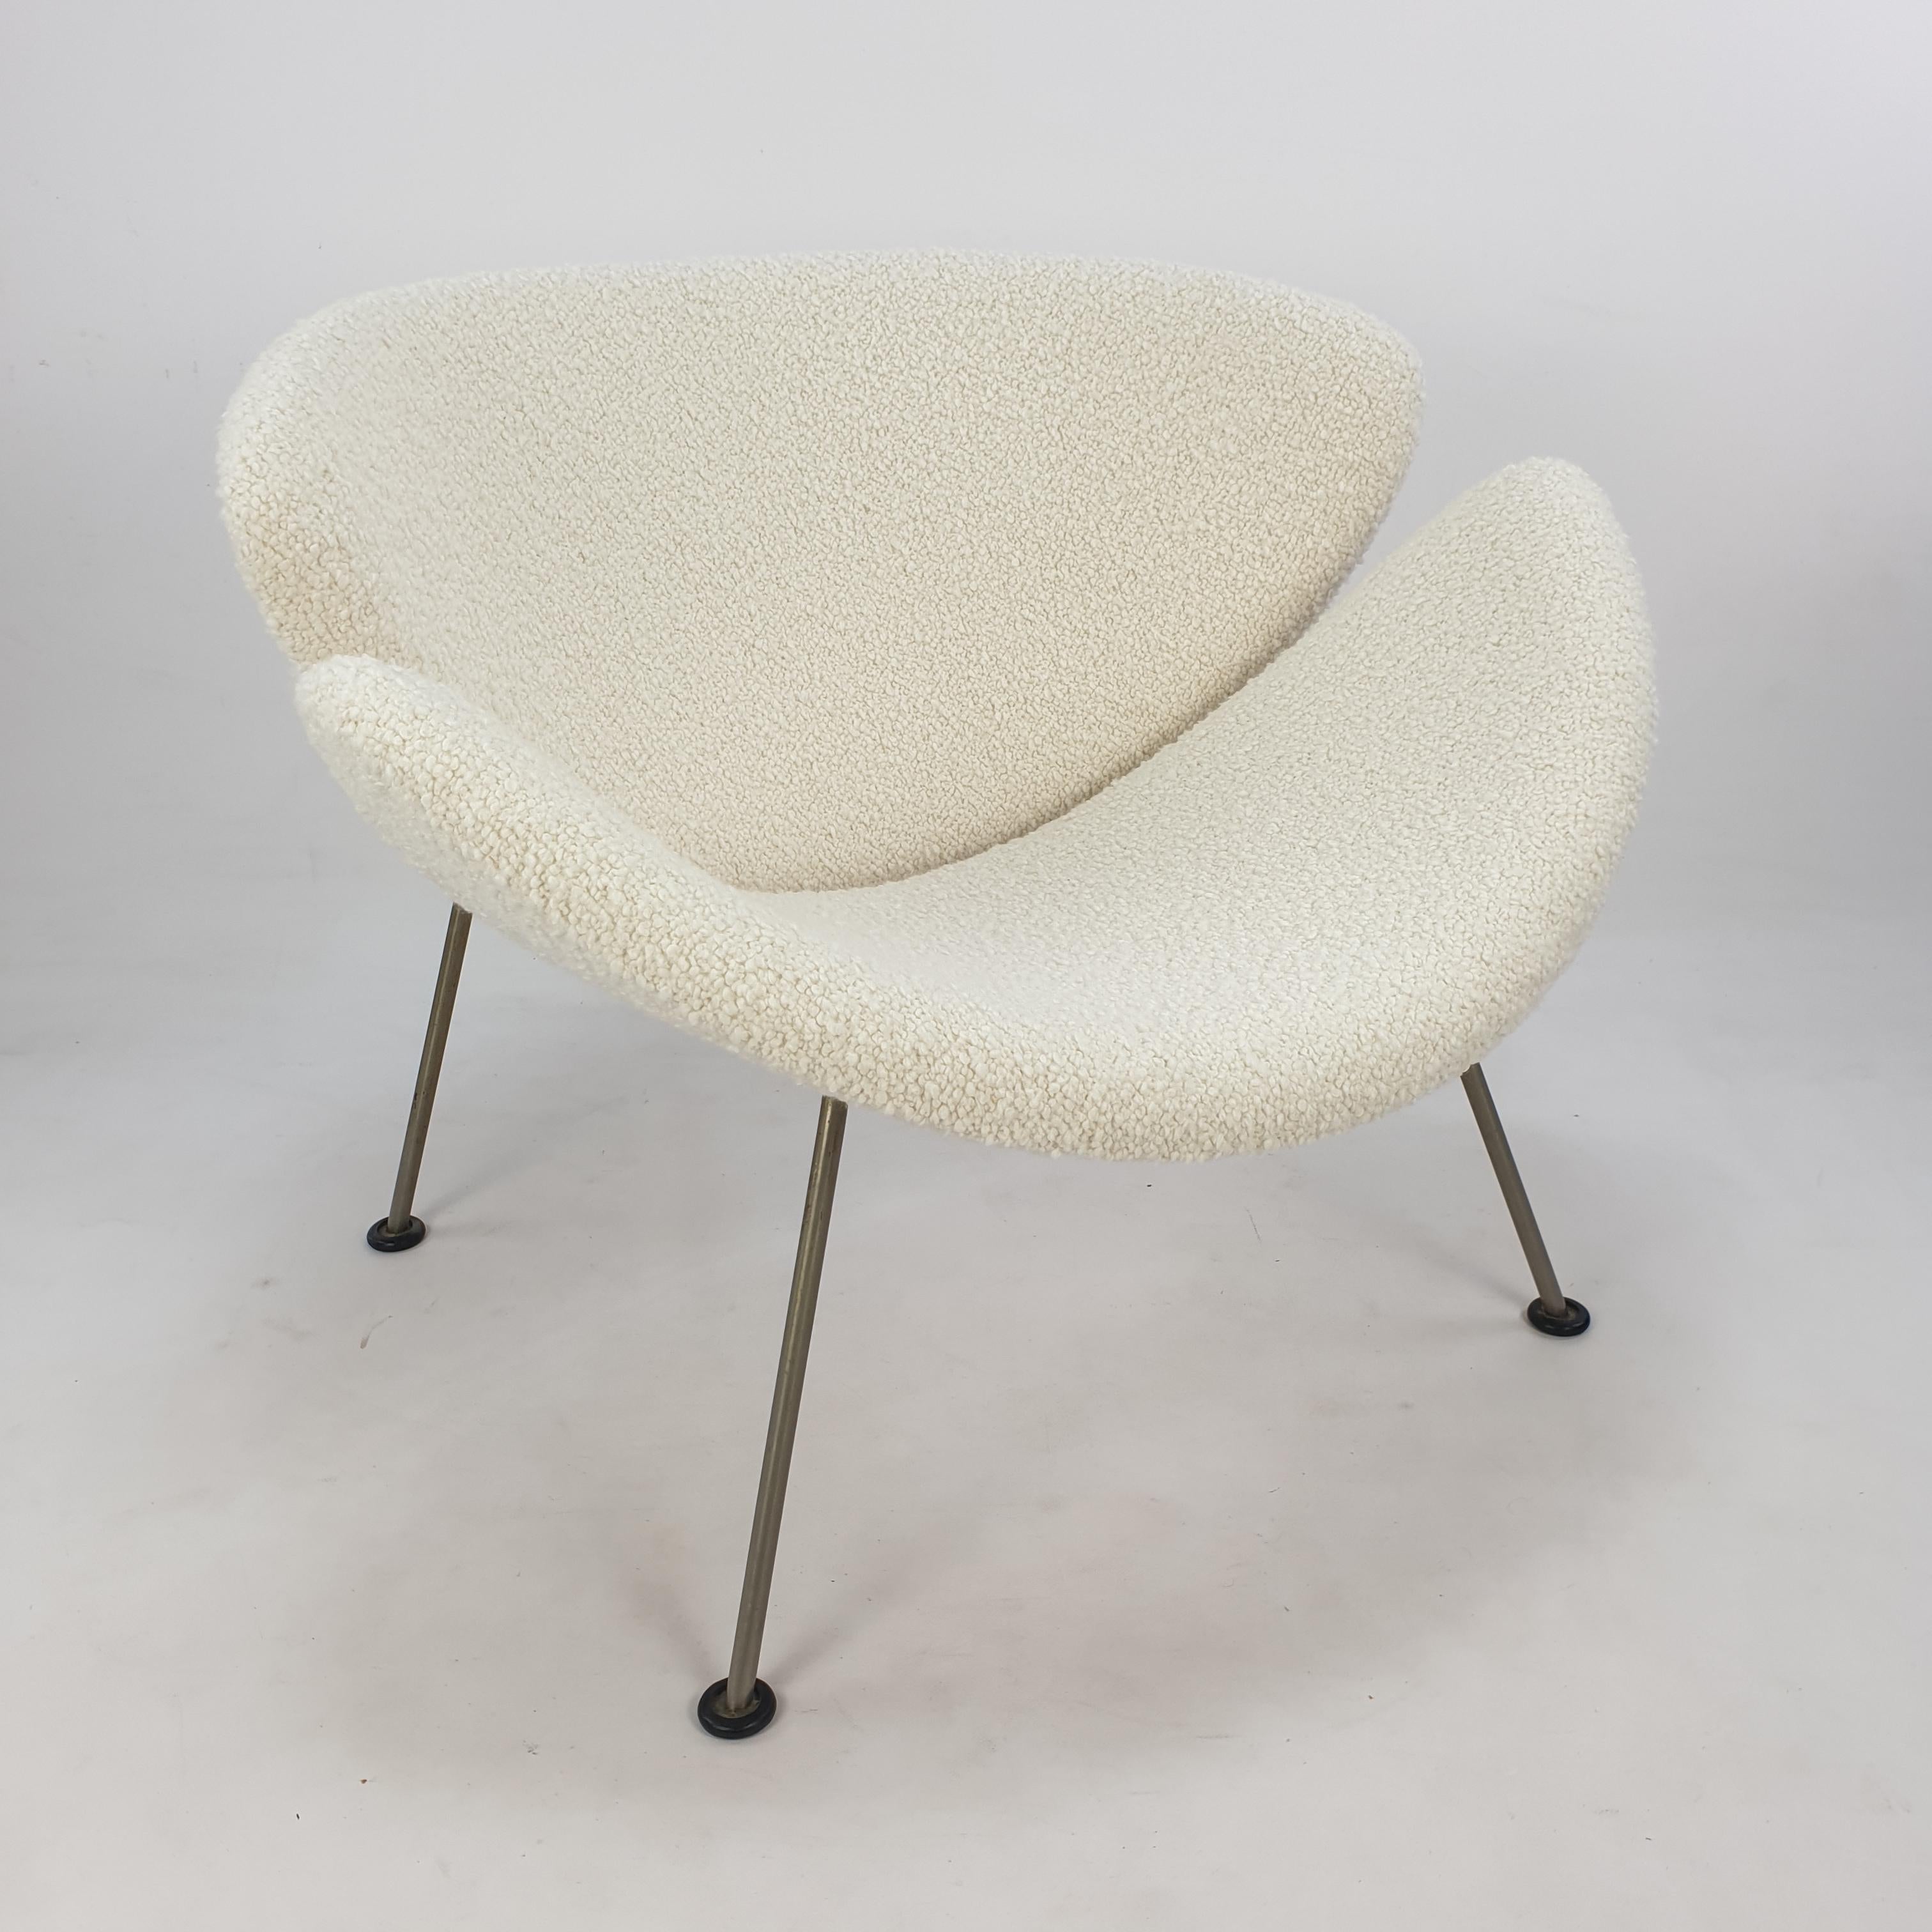 The famous Artifort orange slice chair by Pierre Paulin, designed in the 60's.
This is a early edition and is produced in the 60's, it has nickel legs.

It is a cute and very comfortable chair.

The chair is just reupholstered with new foam and